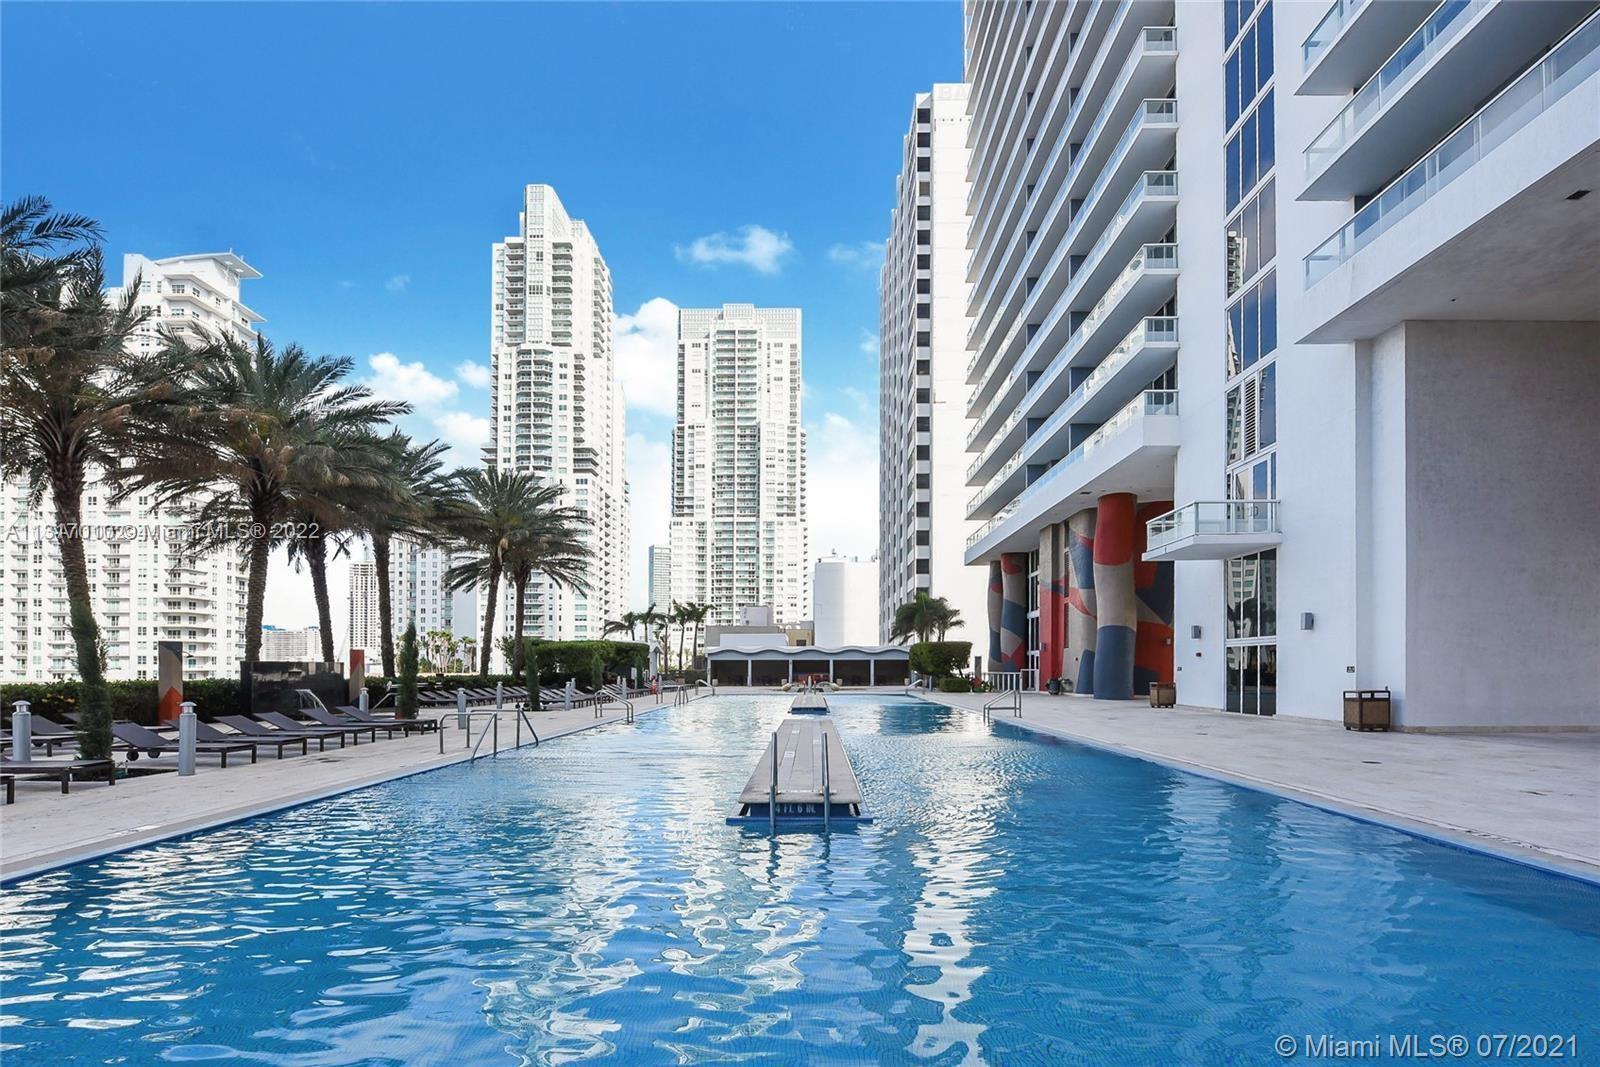 50 Biscayne is a unique residential tower designed by Sieger Suarez with stunning city and water vie